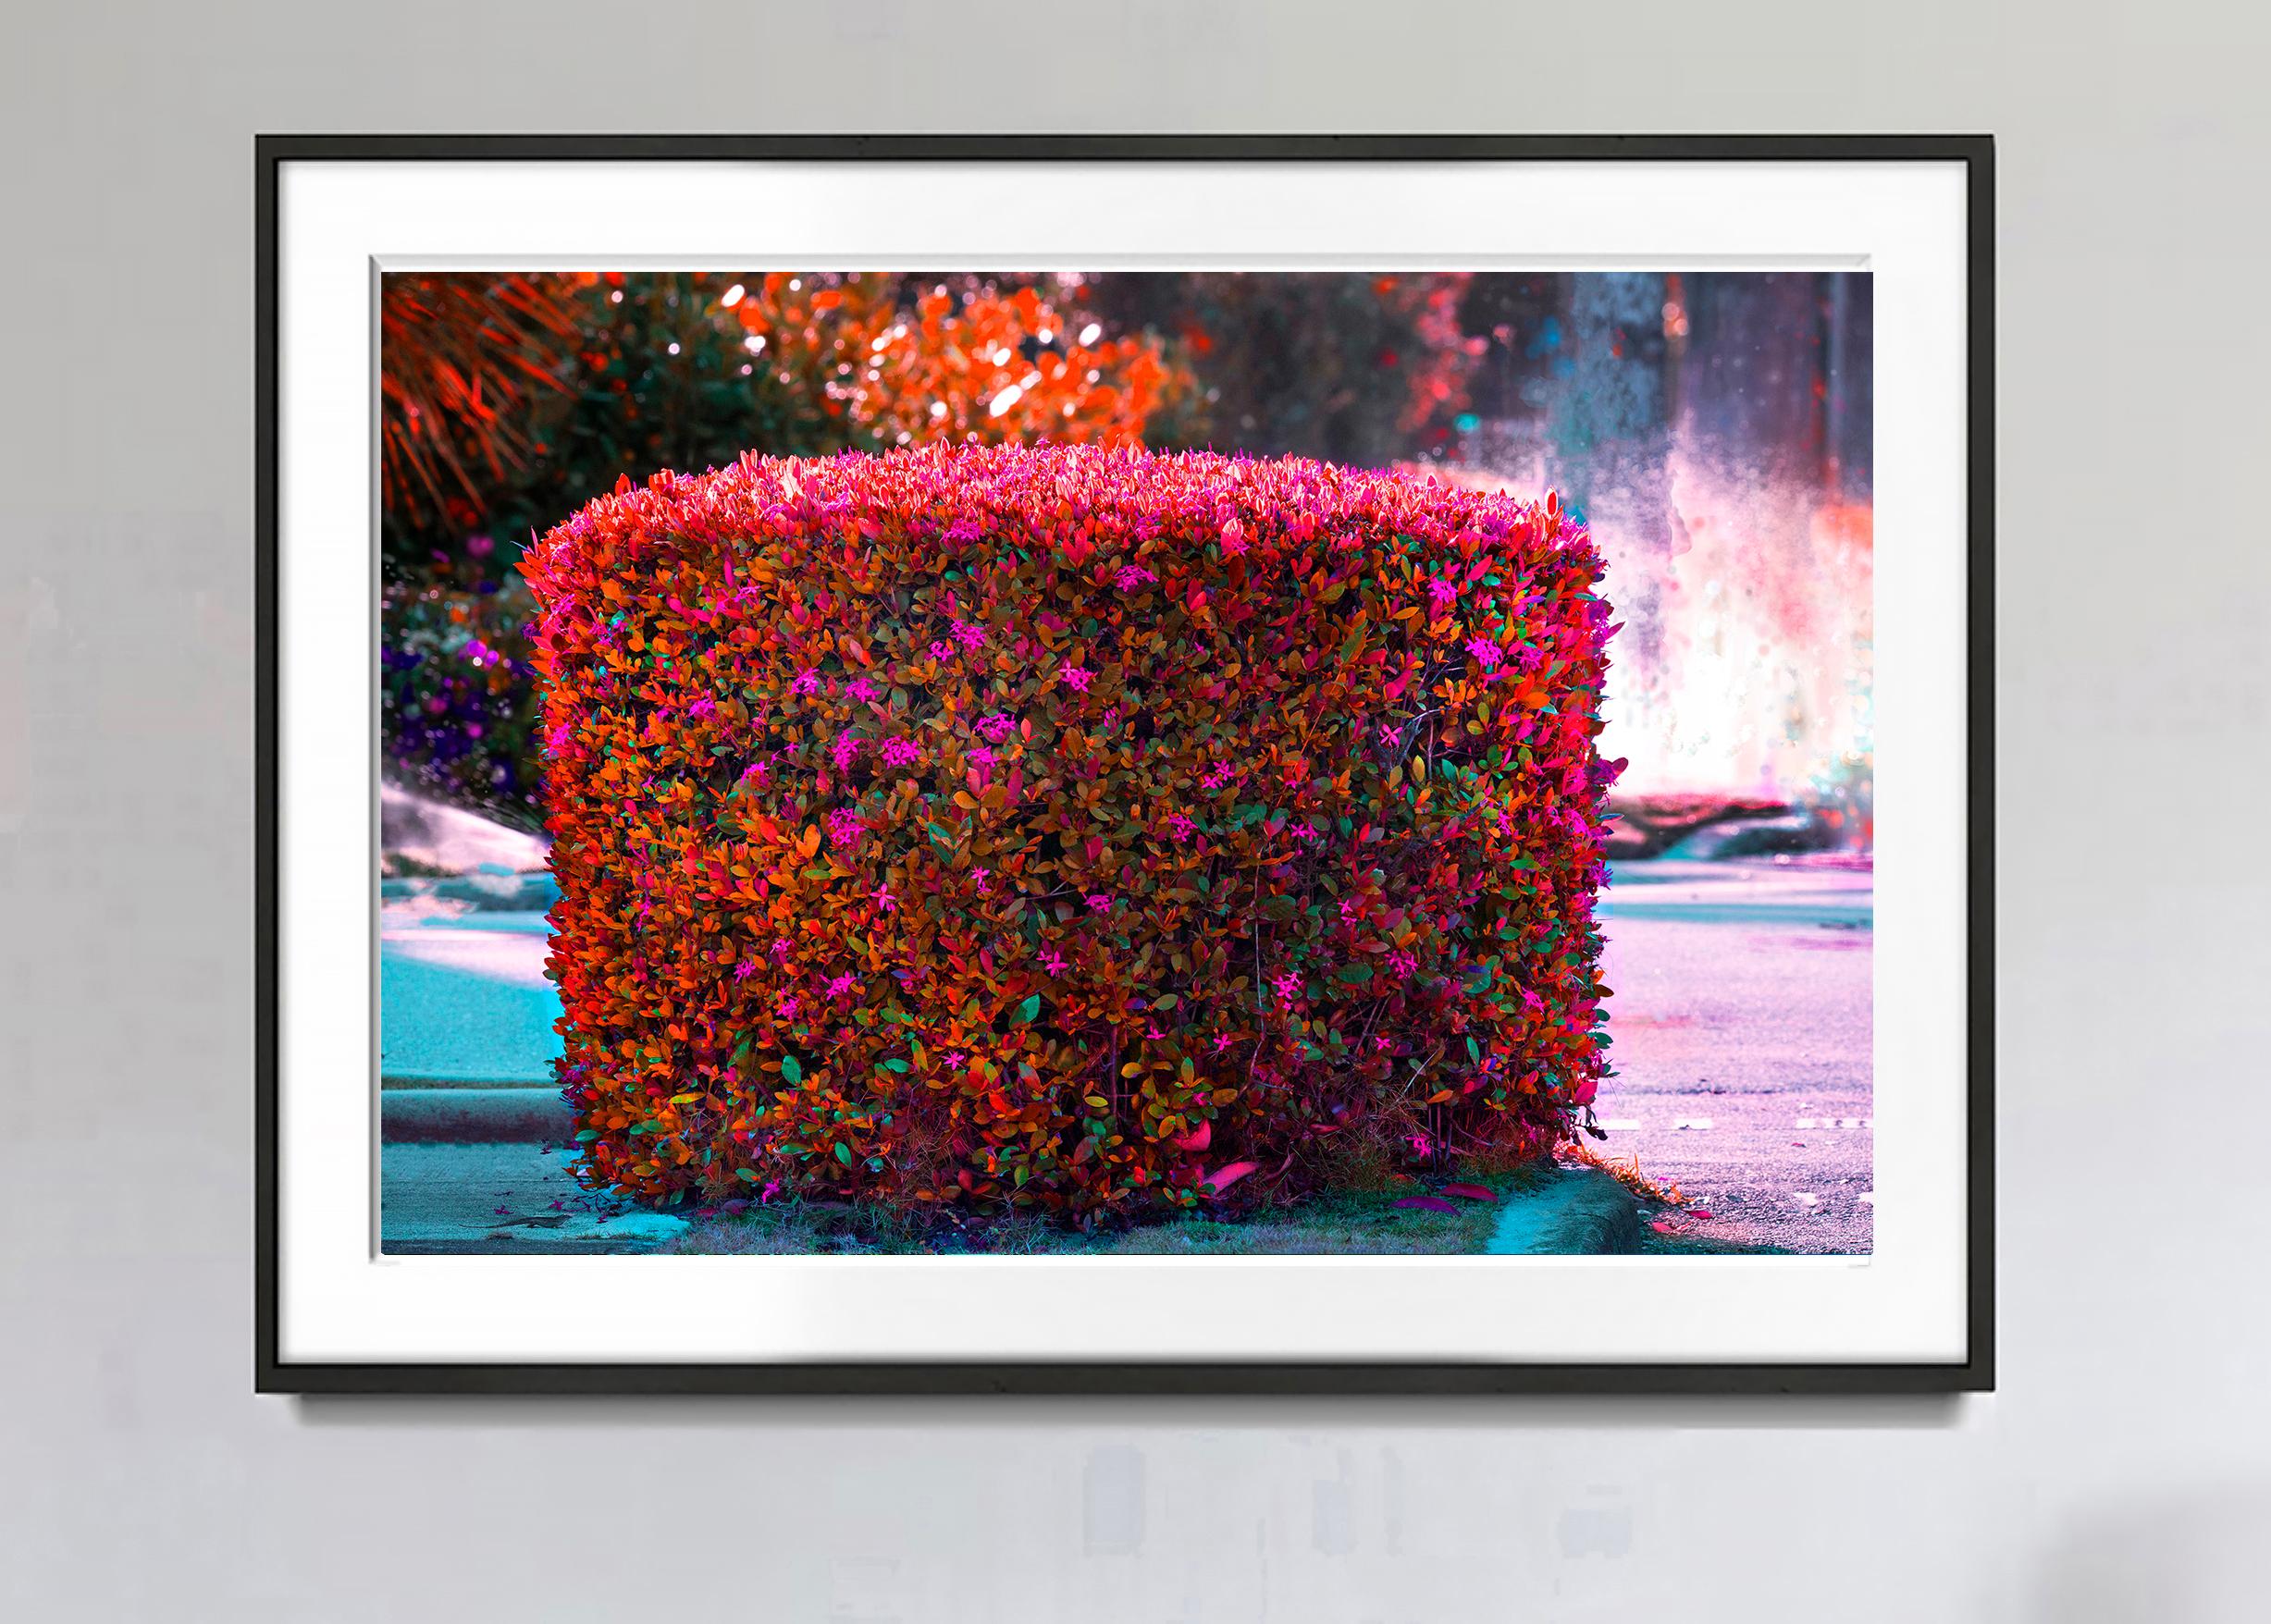 Hedge Fun  - Palm Beach in Magenta and Orange with Lizard - Photograph by Robert Funk